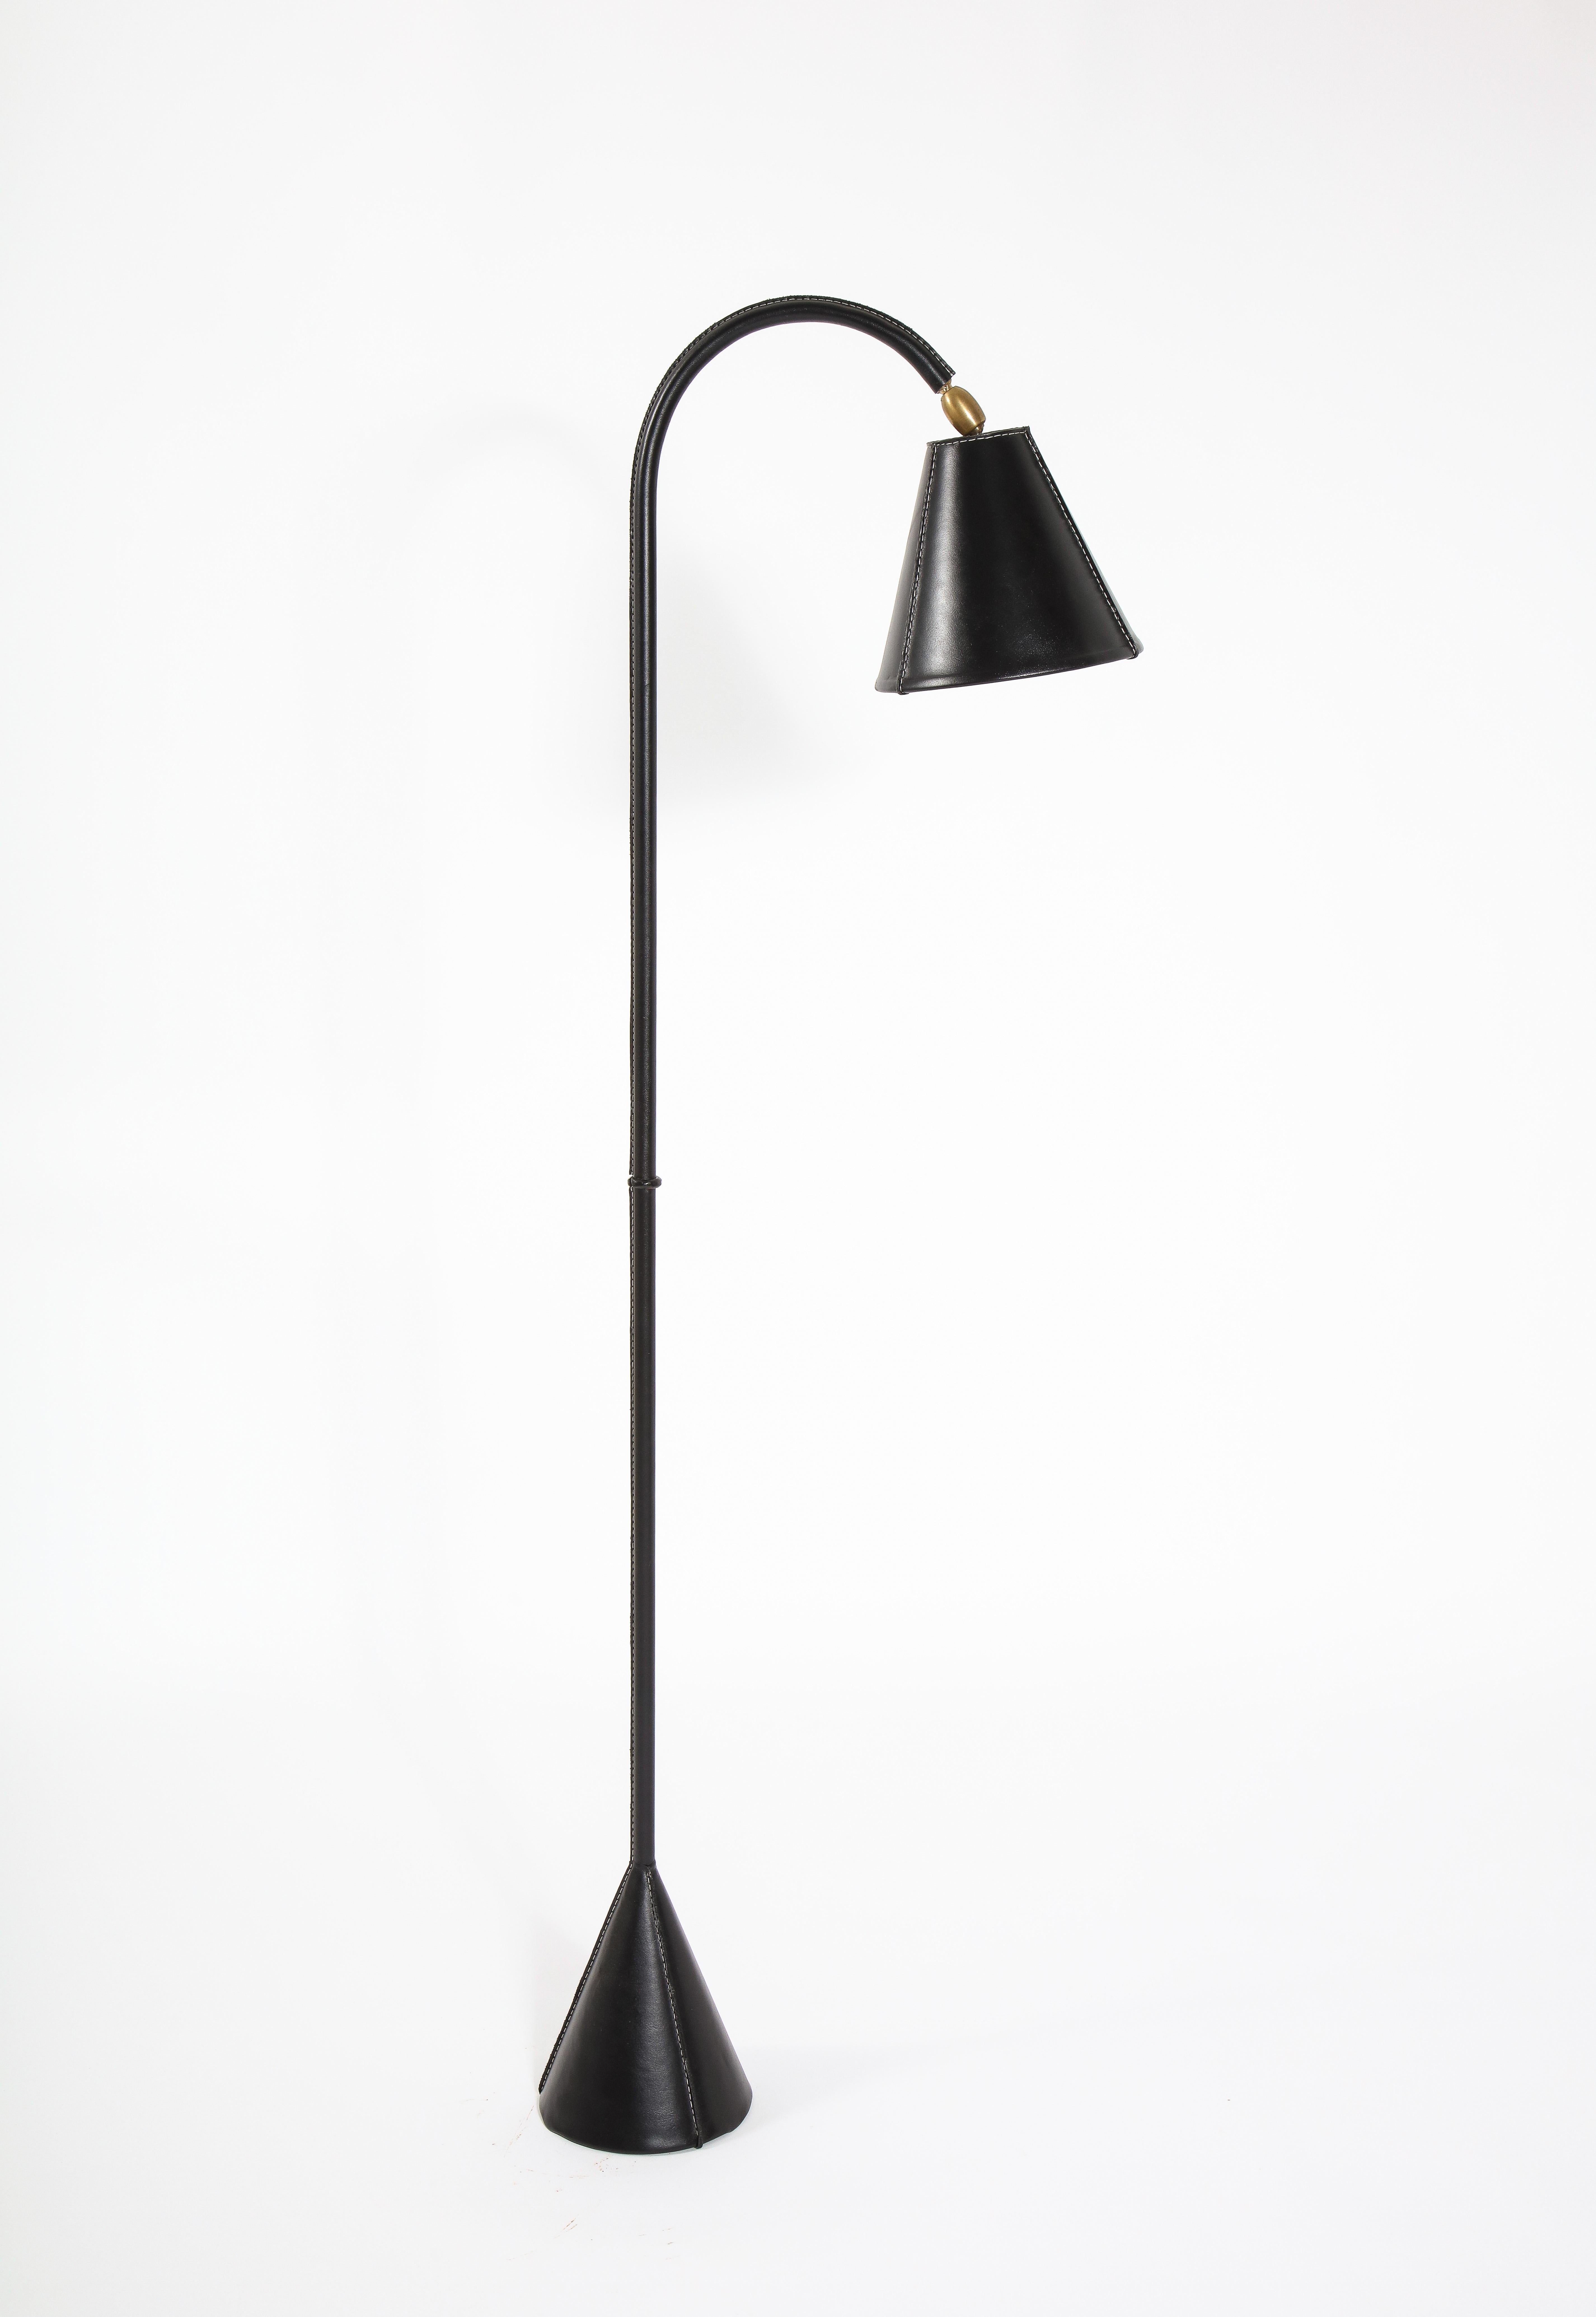 Elegant Jacques Adnet reading floor lamp wrapped in hand-stitched black leather. Leather was replaced by the foremost Adnet restorer in the united states, documentation upon request.